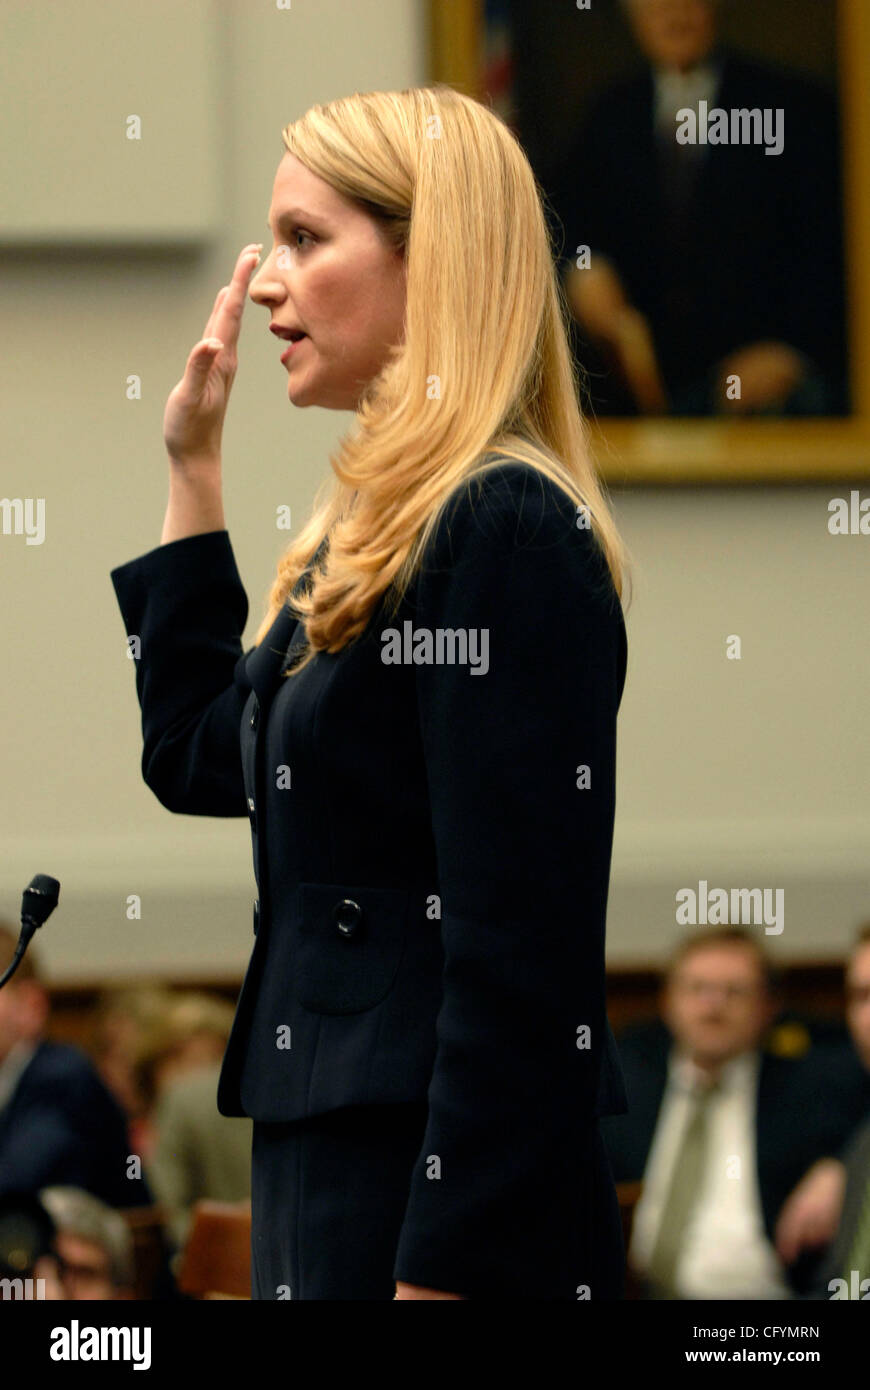 May 23, 2007 - Washington, DC, USA - Former Justice Department liaison to the White House, MONICA GOODLING, is sworn in prior to testifying before the House Judiciary committee about her role in the firing of US attorneys in late 2006 and early 2007. Goodling denied taken a major part in the scandal Stock Photo